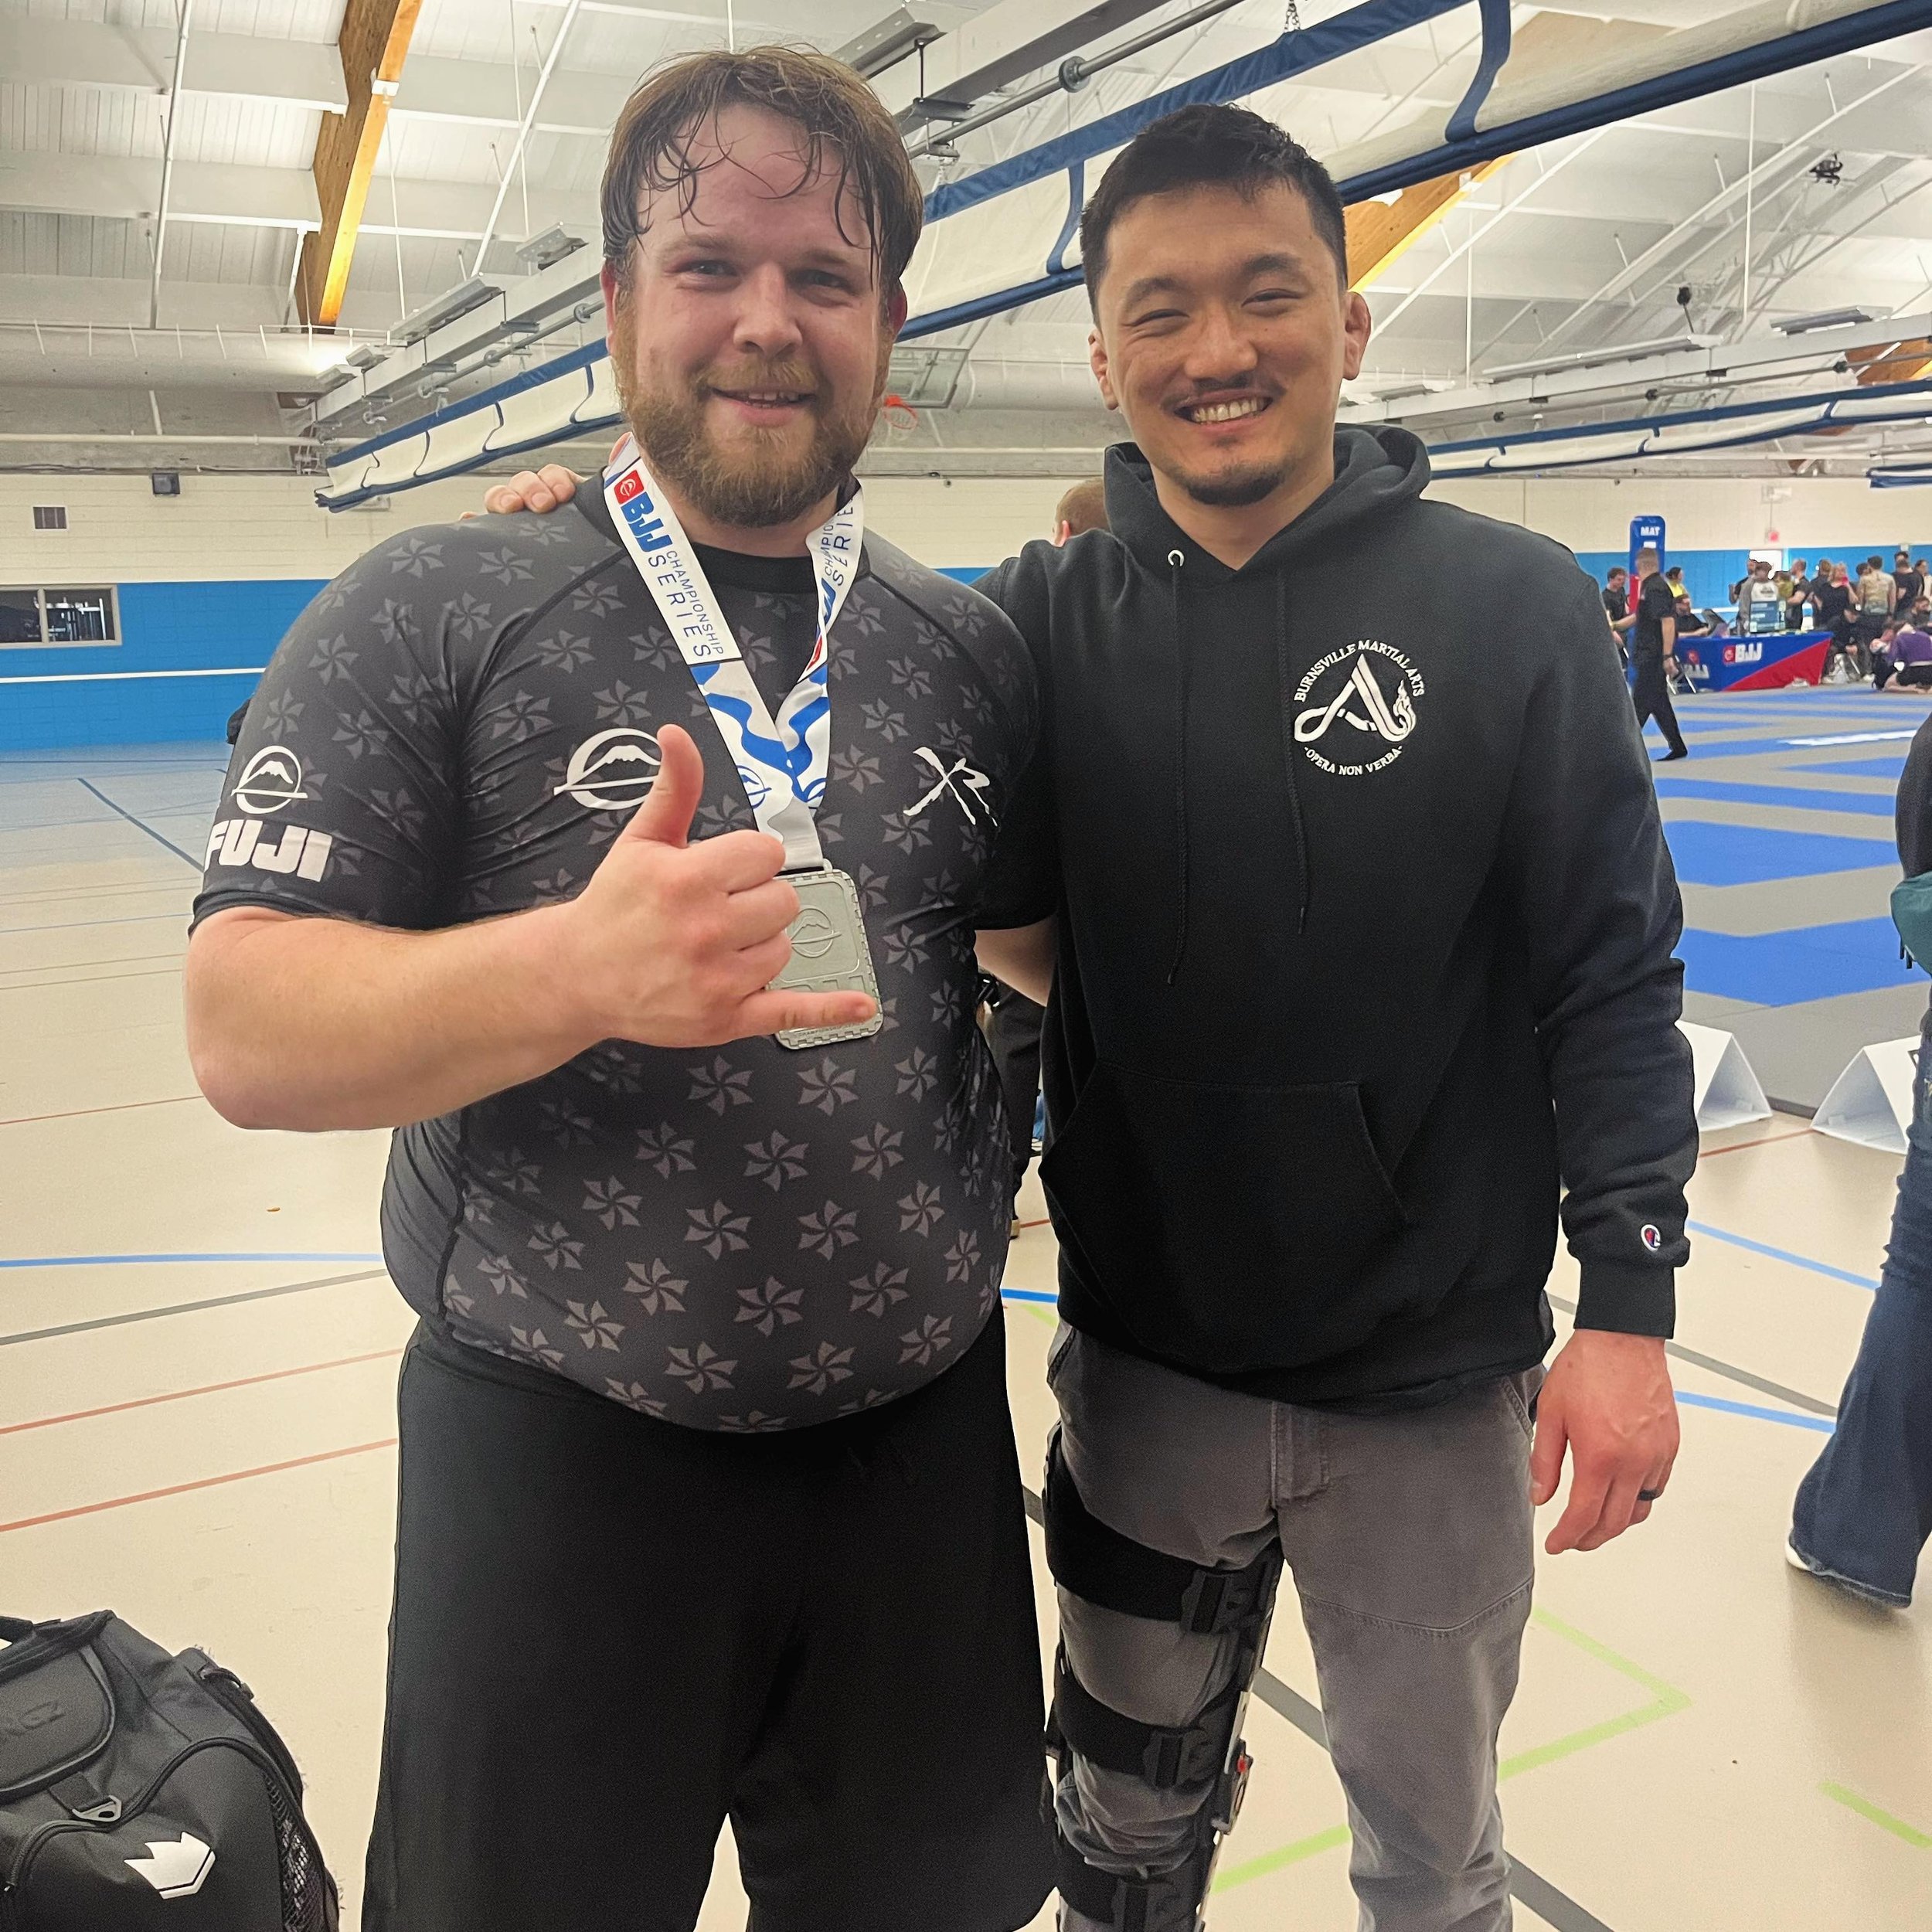 Congratulations to Dr. Dan! 1st place in no-gi and 2nd place in gi at the Fuji BJJ tournament this weekend!
.
.
.
.
.
#bjj #competition #nogi #grappling #jiujitsu #podium #1stplace🏆 #2ndplace🏆 #teamacademy #fuji